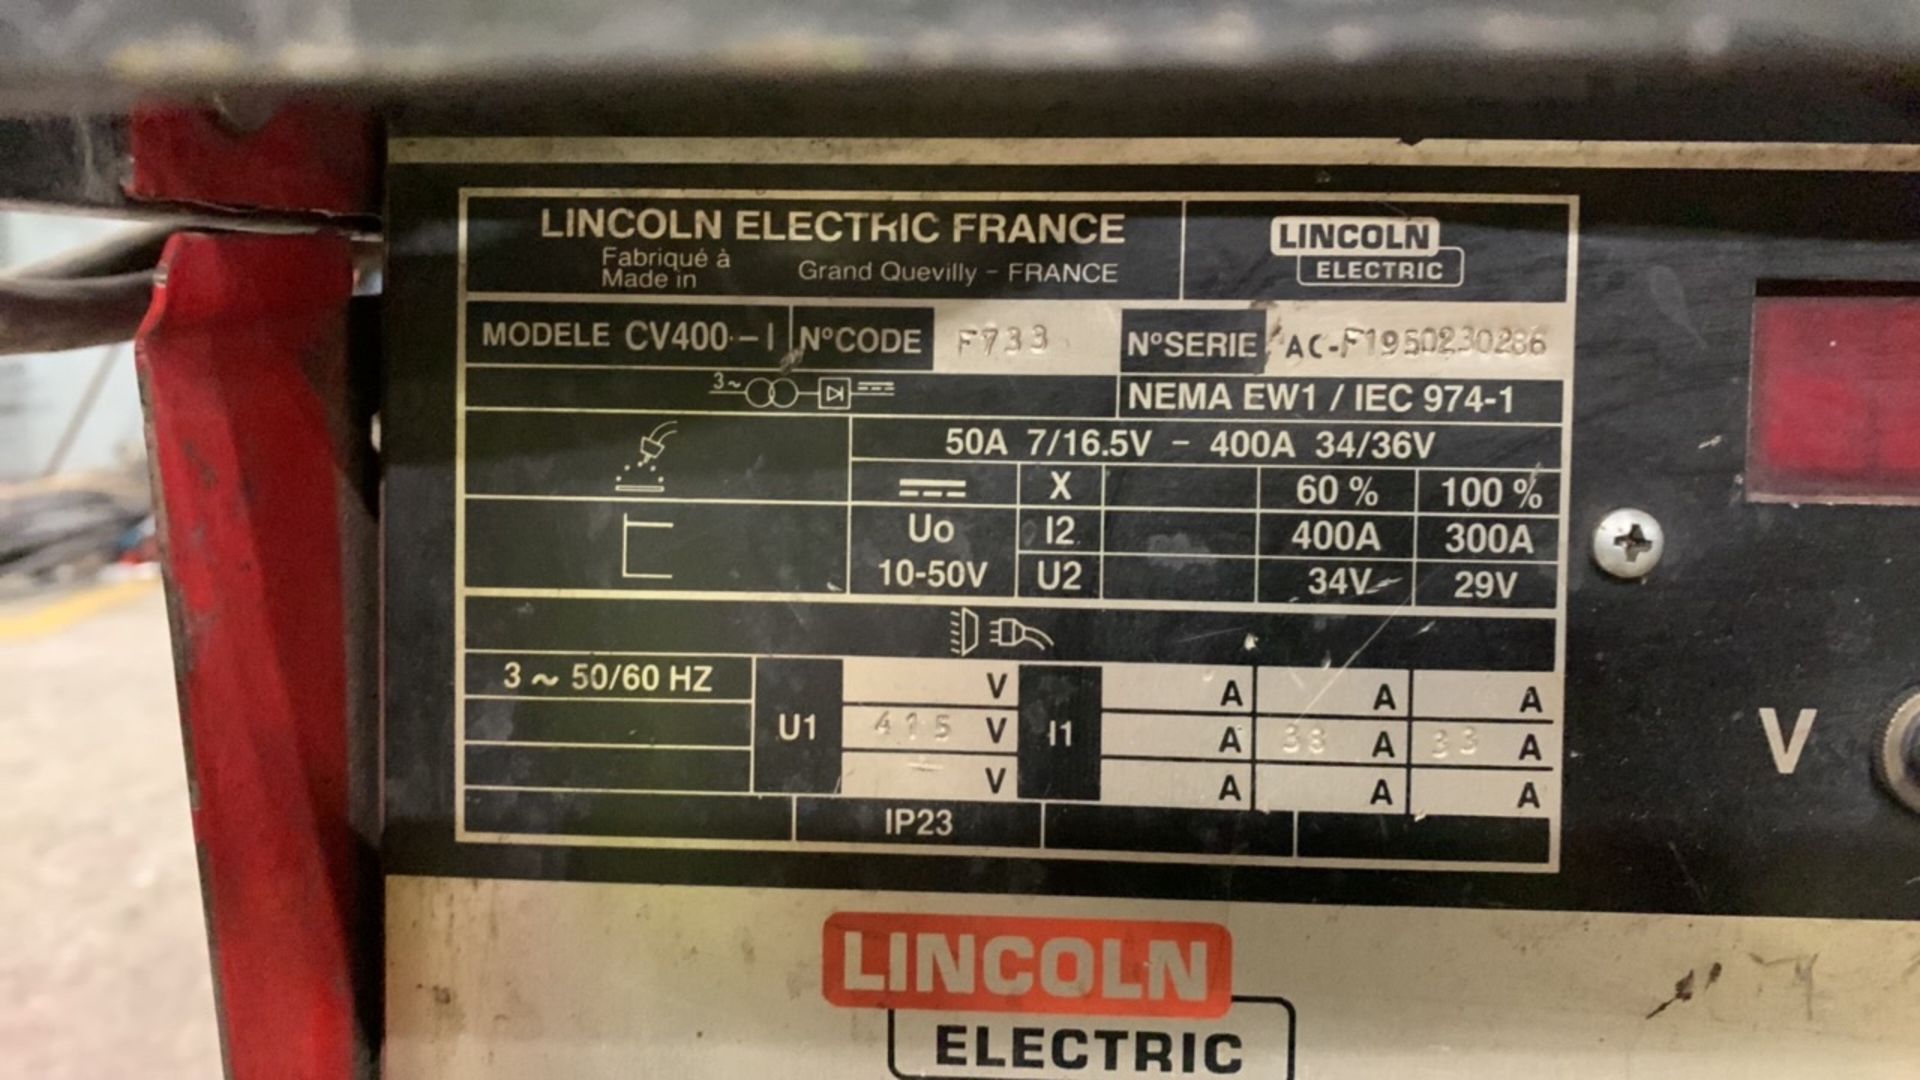 Lincoln Electric Idealarc CV400 Mig Welder Serial No AC-F1950230266 WITH ln -742 Wire Feed Unit - Image 2 of 4